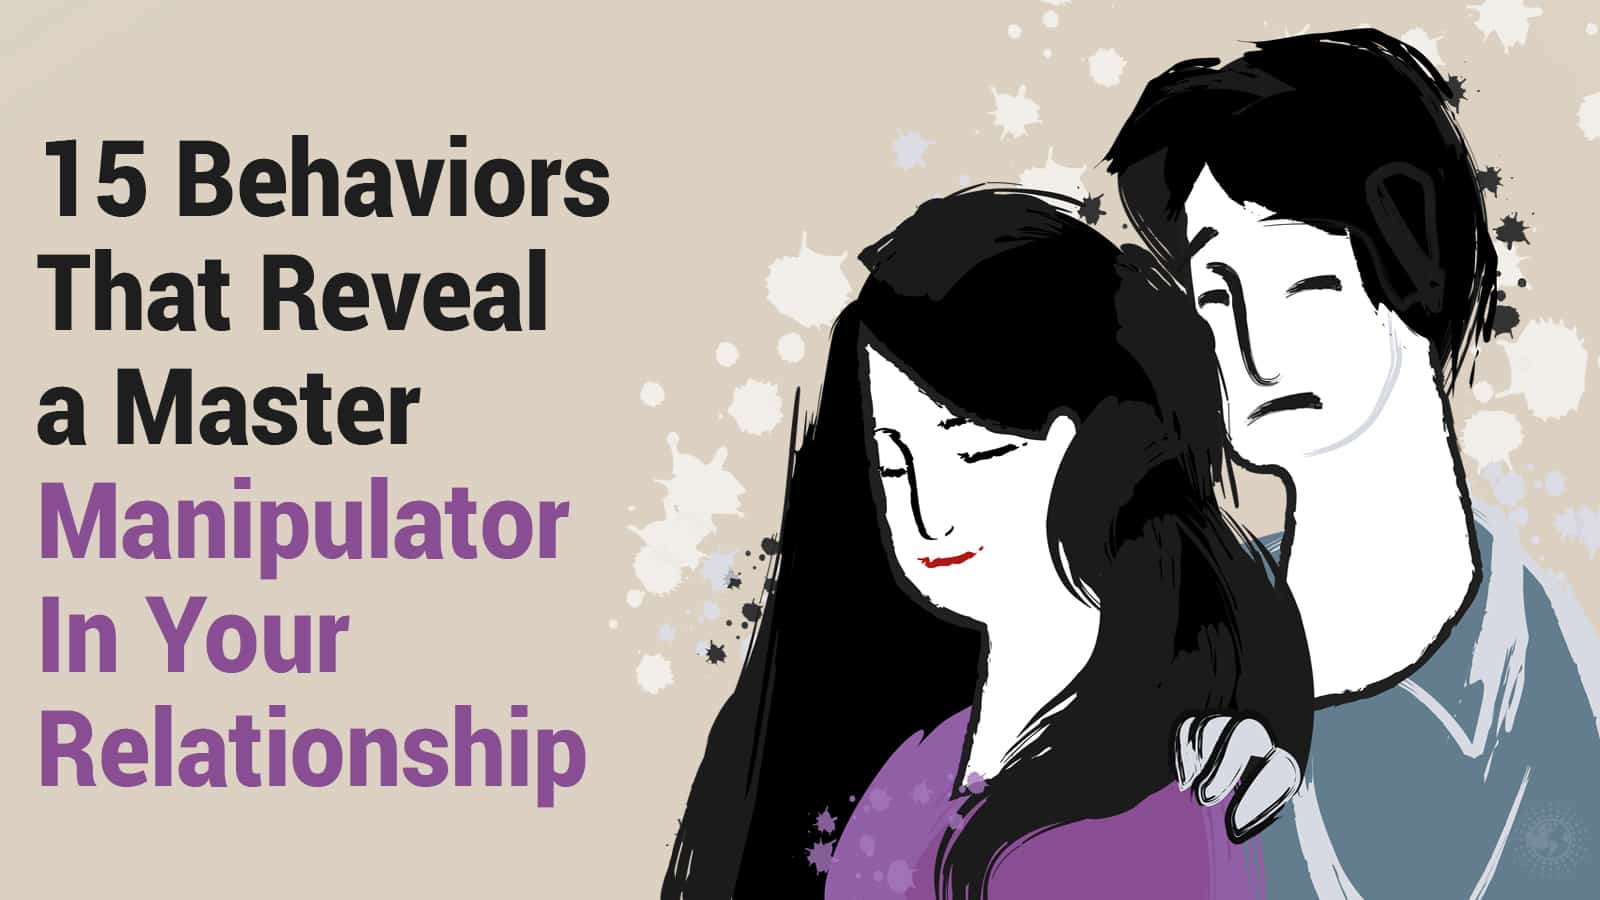 15 Behaviors That Reveal a Master Manipulator In A Relationship